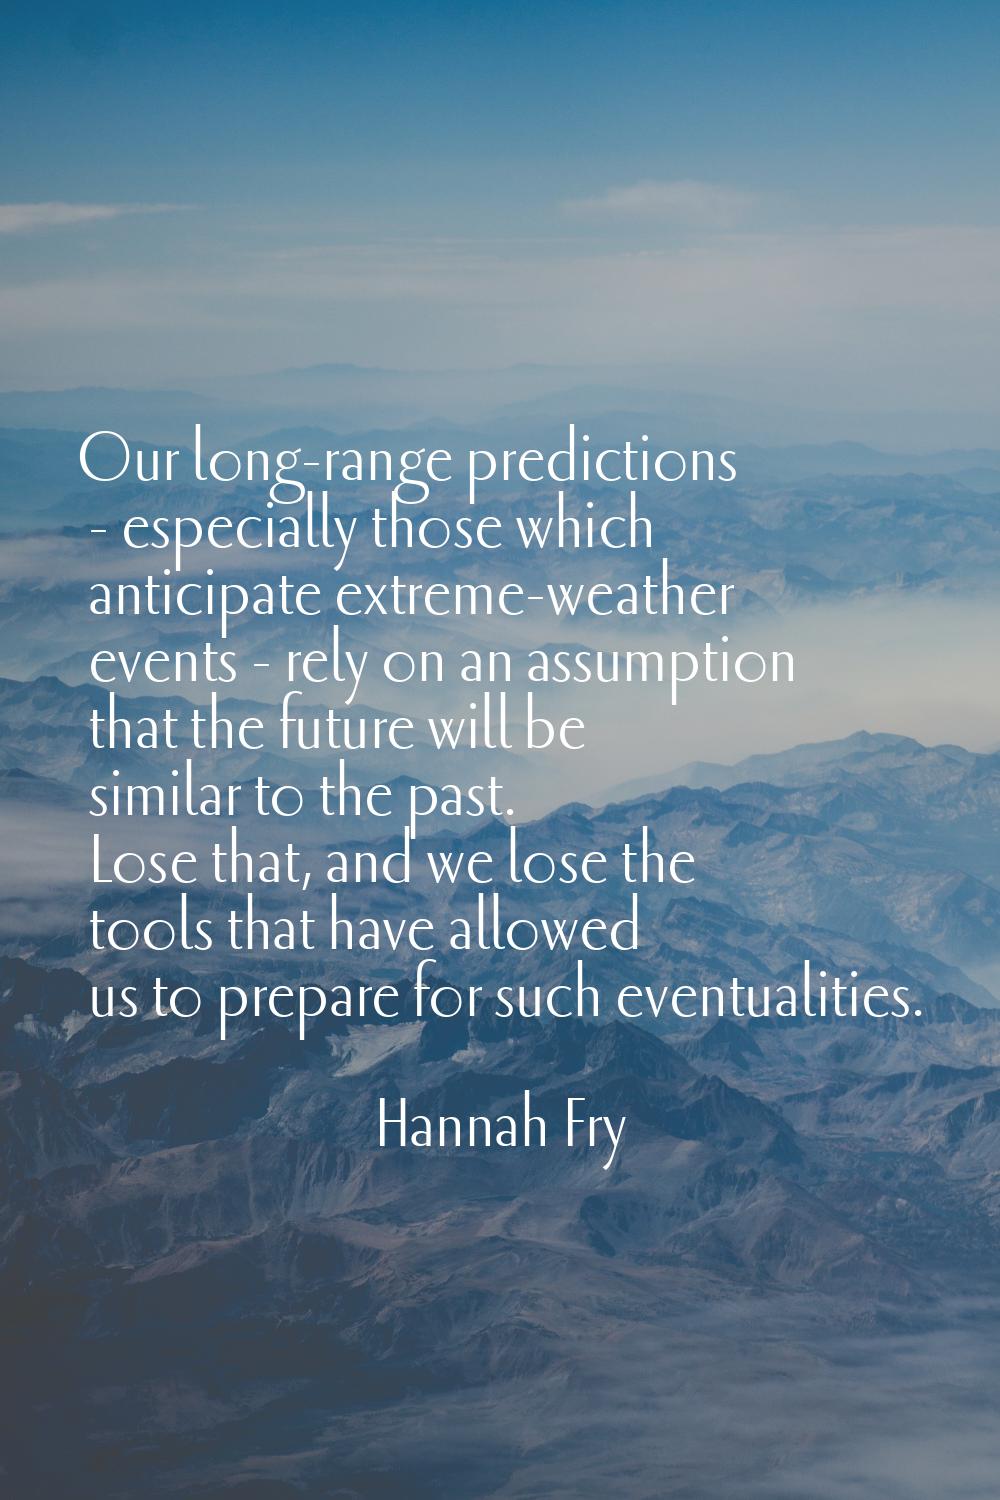 Our long-range predictions - especially those which anticipate extreme-weather events - rely on an 